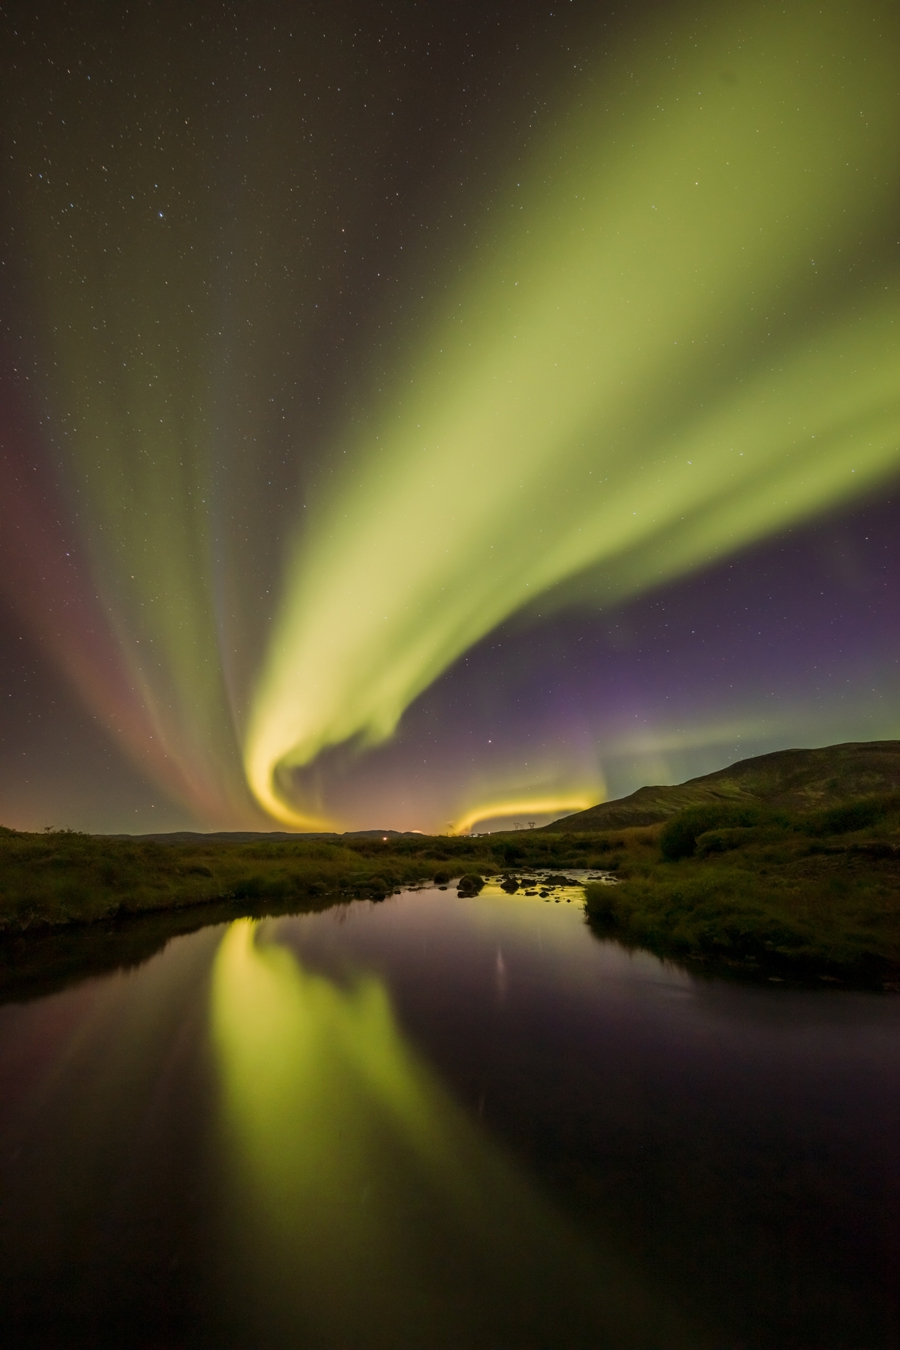 Northern Lights in Iceland displaying a mesmerizing array of greens and purples that arc across a star-filled night sky, with their reflection shimmering on the surface of a tranquil river below. Gentle hills frame the scene. a sky view looking up at the camera